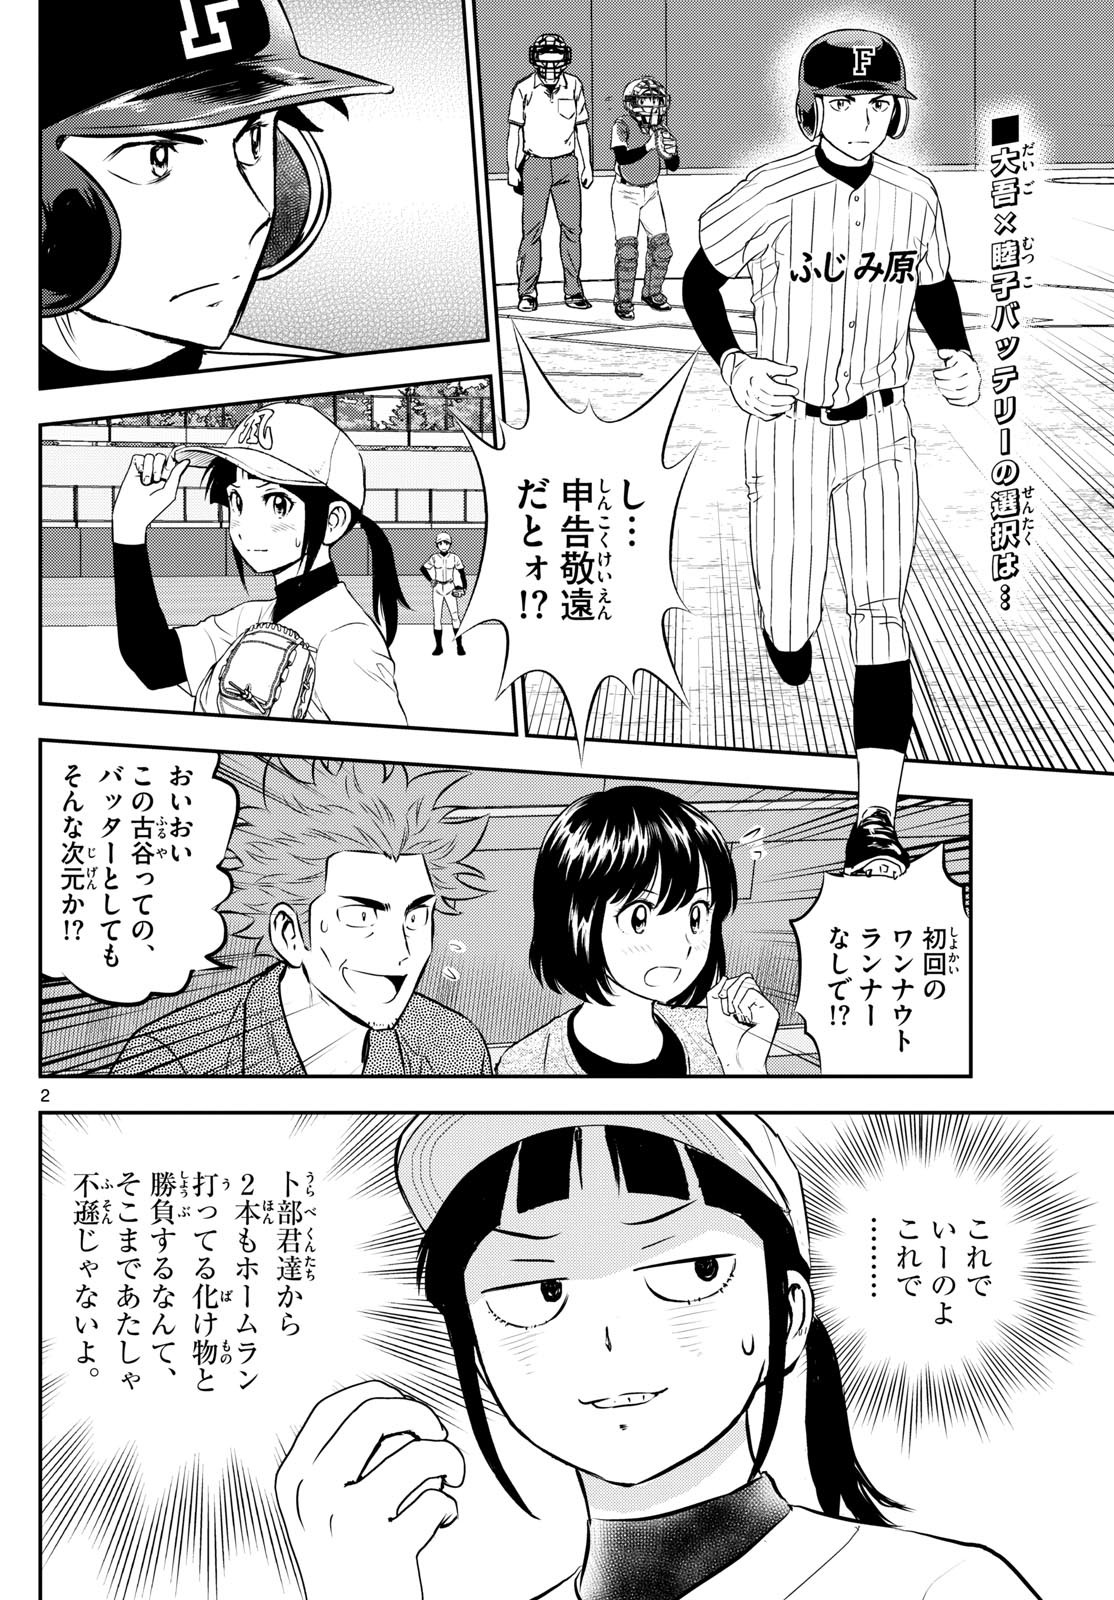 Major 2nd - メジャーセカンド - Chapter 267 - Page 2